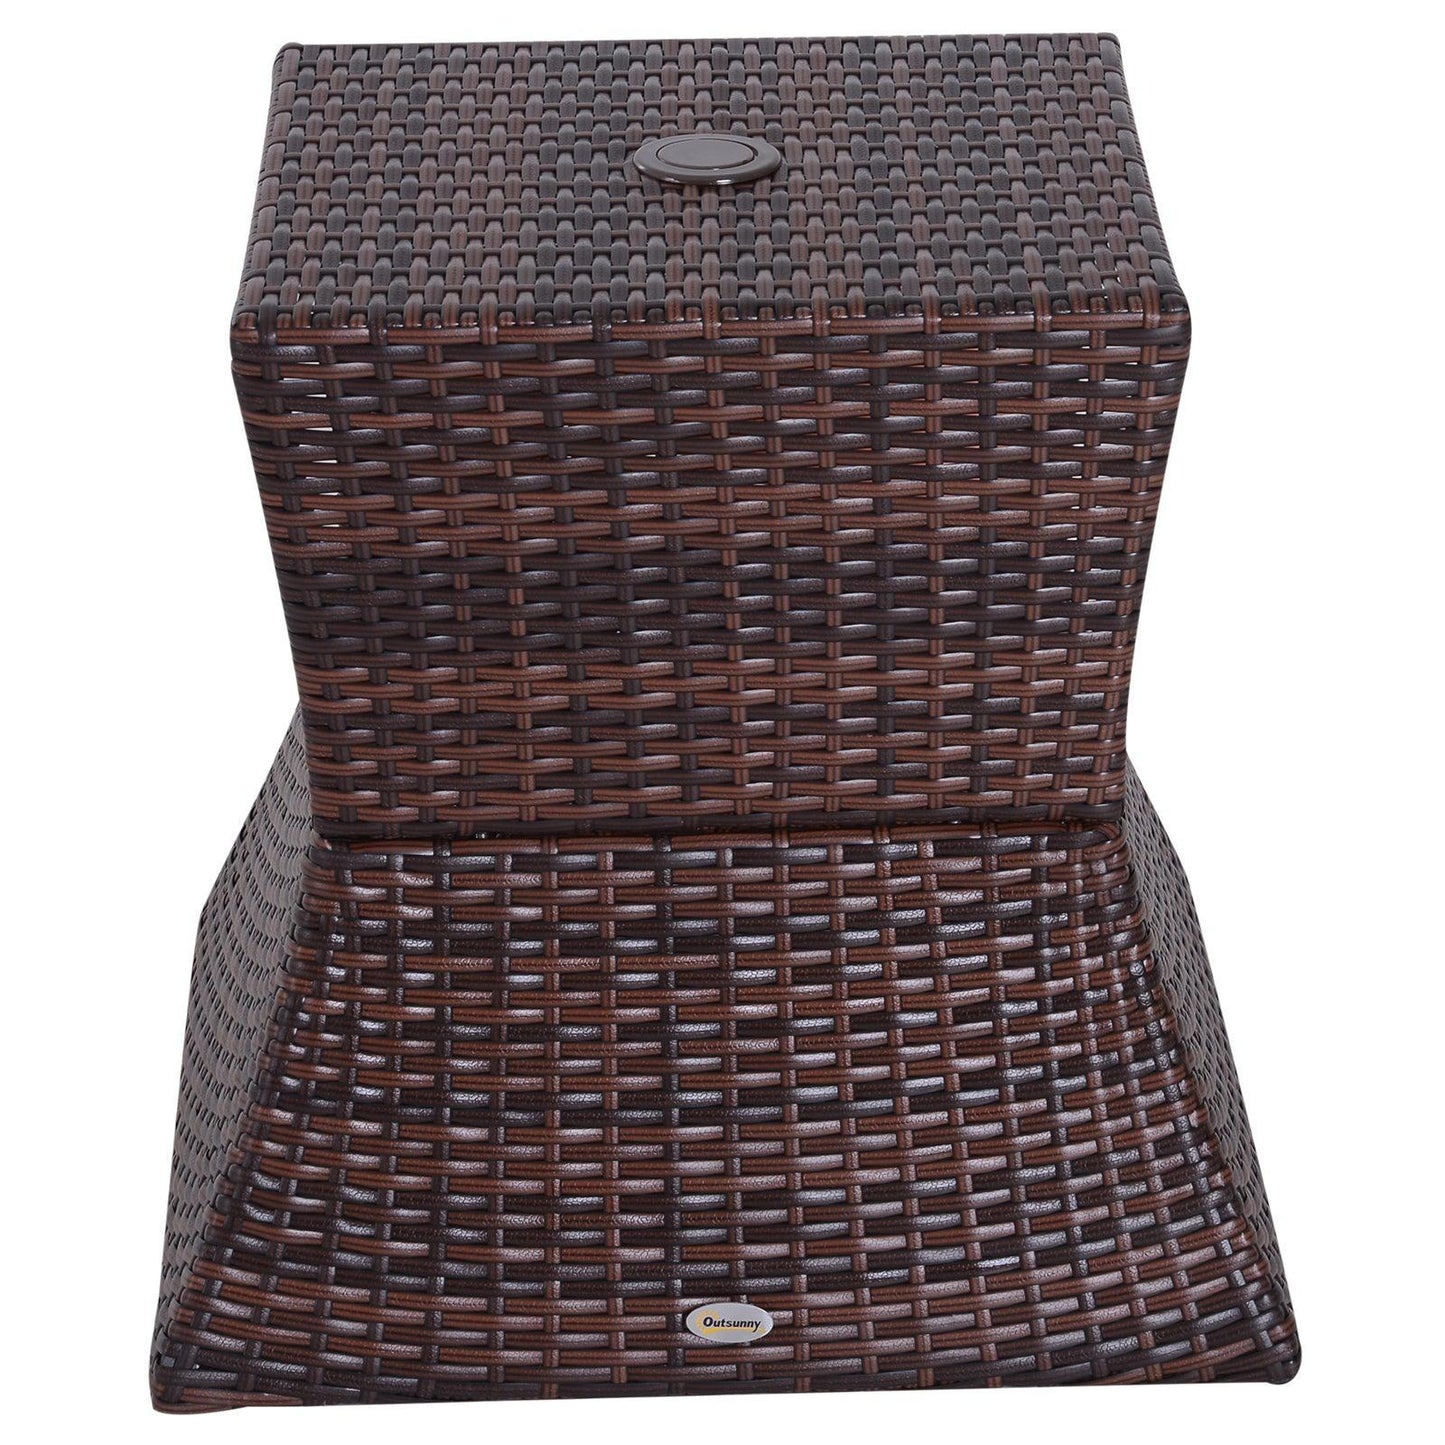 Outsunny Outdoor Rattan Table with Umbrella Hole & Storage, Brown - ALL4U RETAILER LTD